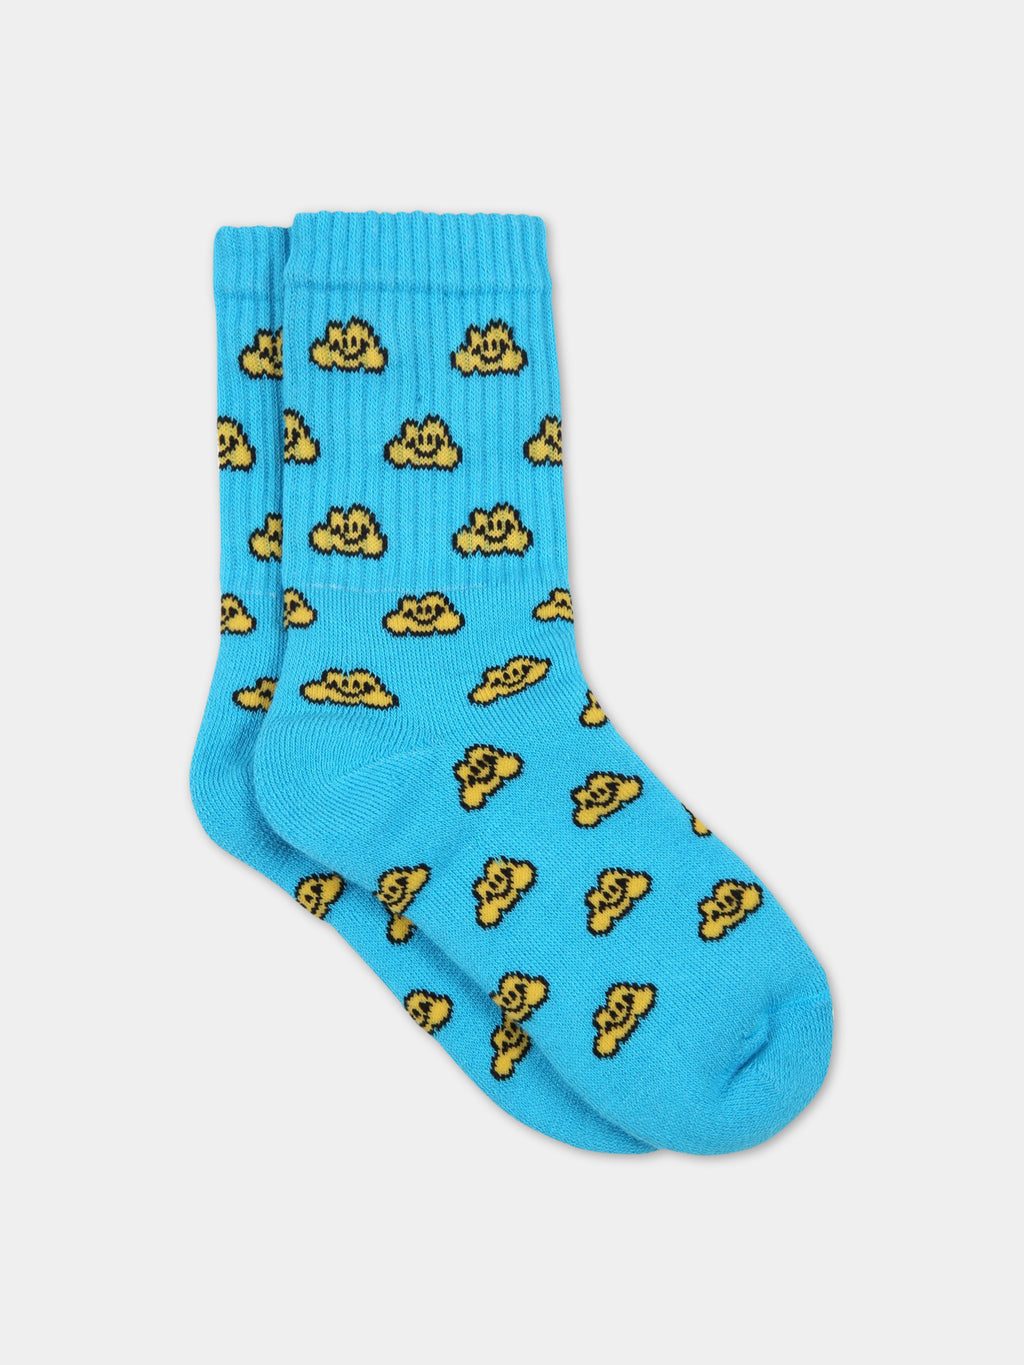 Blue socks for kids with yellow clouds